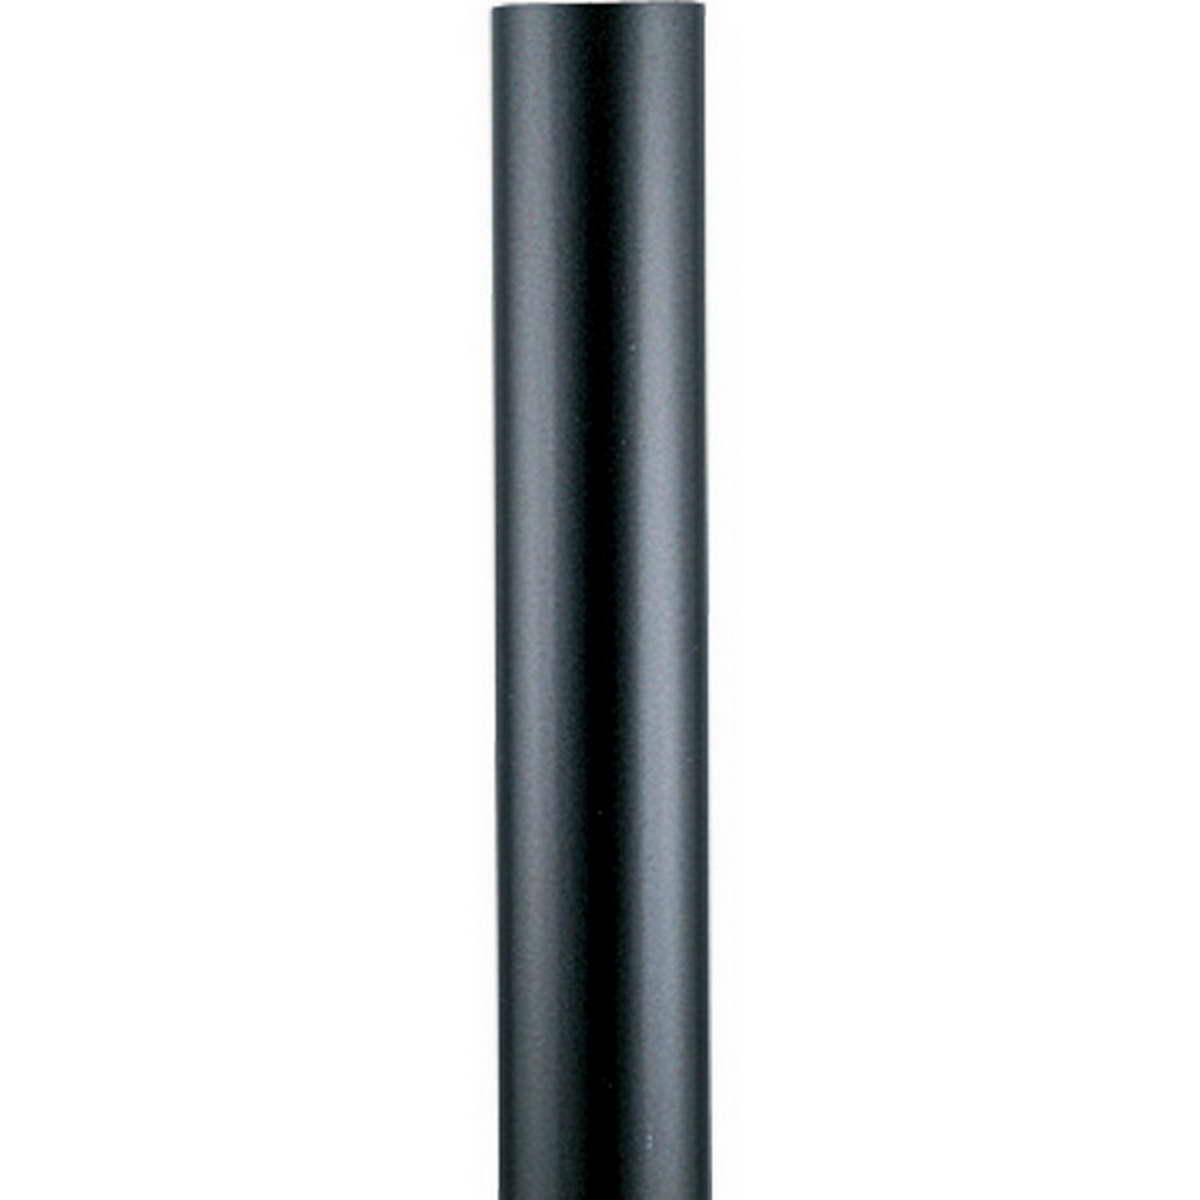 12 Ft Round Aluminum Direct Burial Pole 3 In. Shaft Black Finish